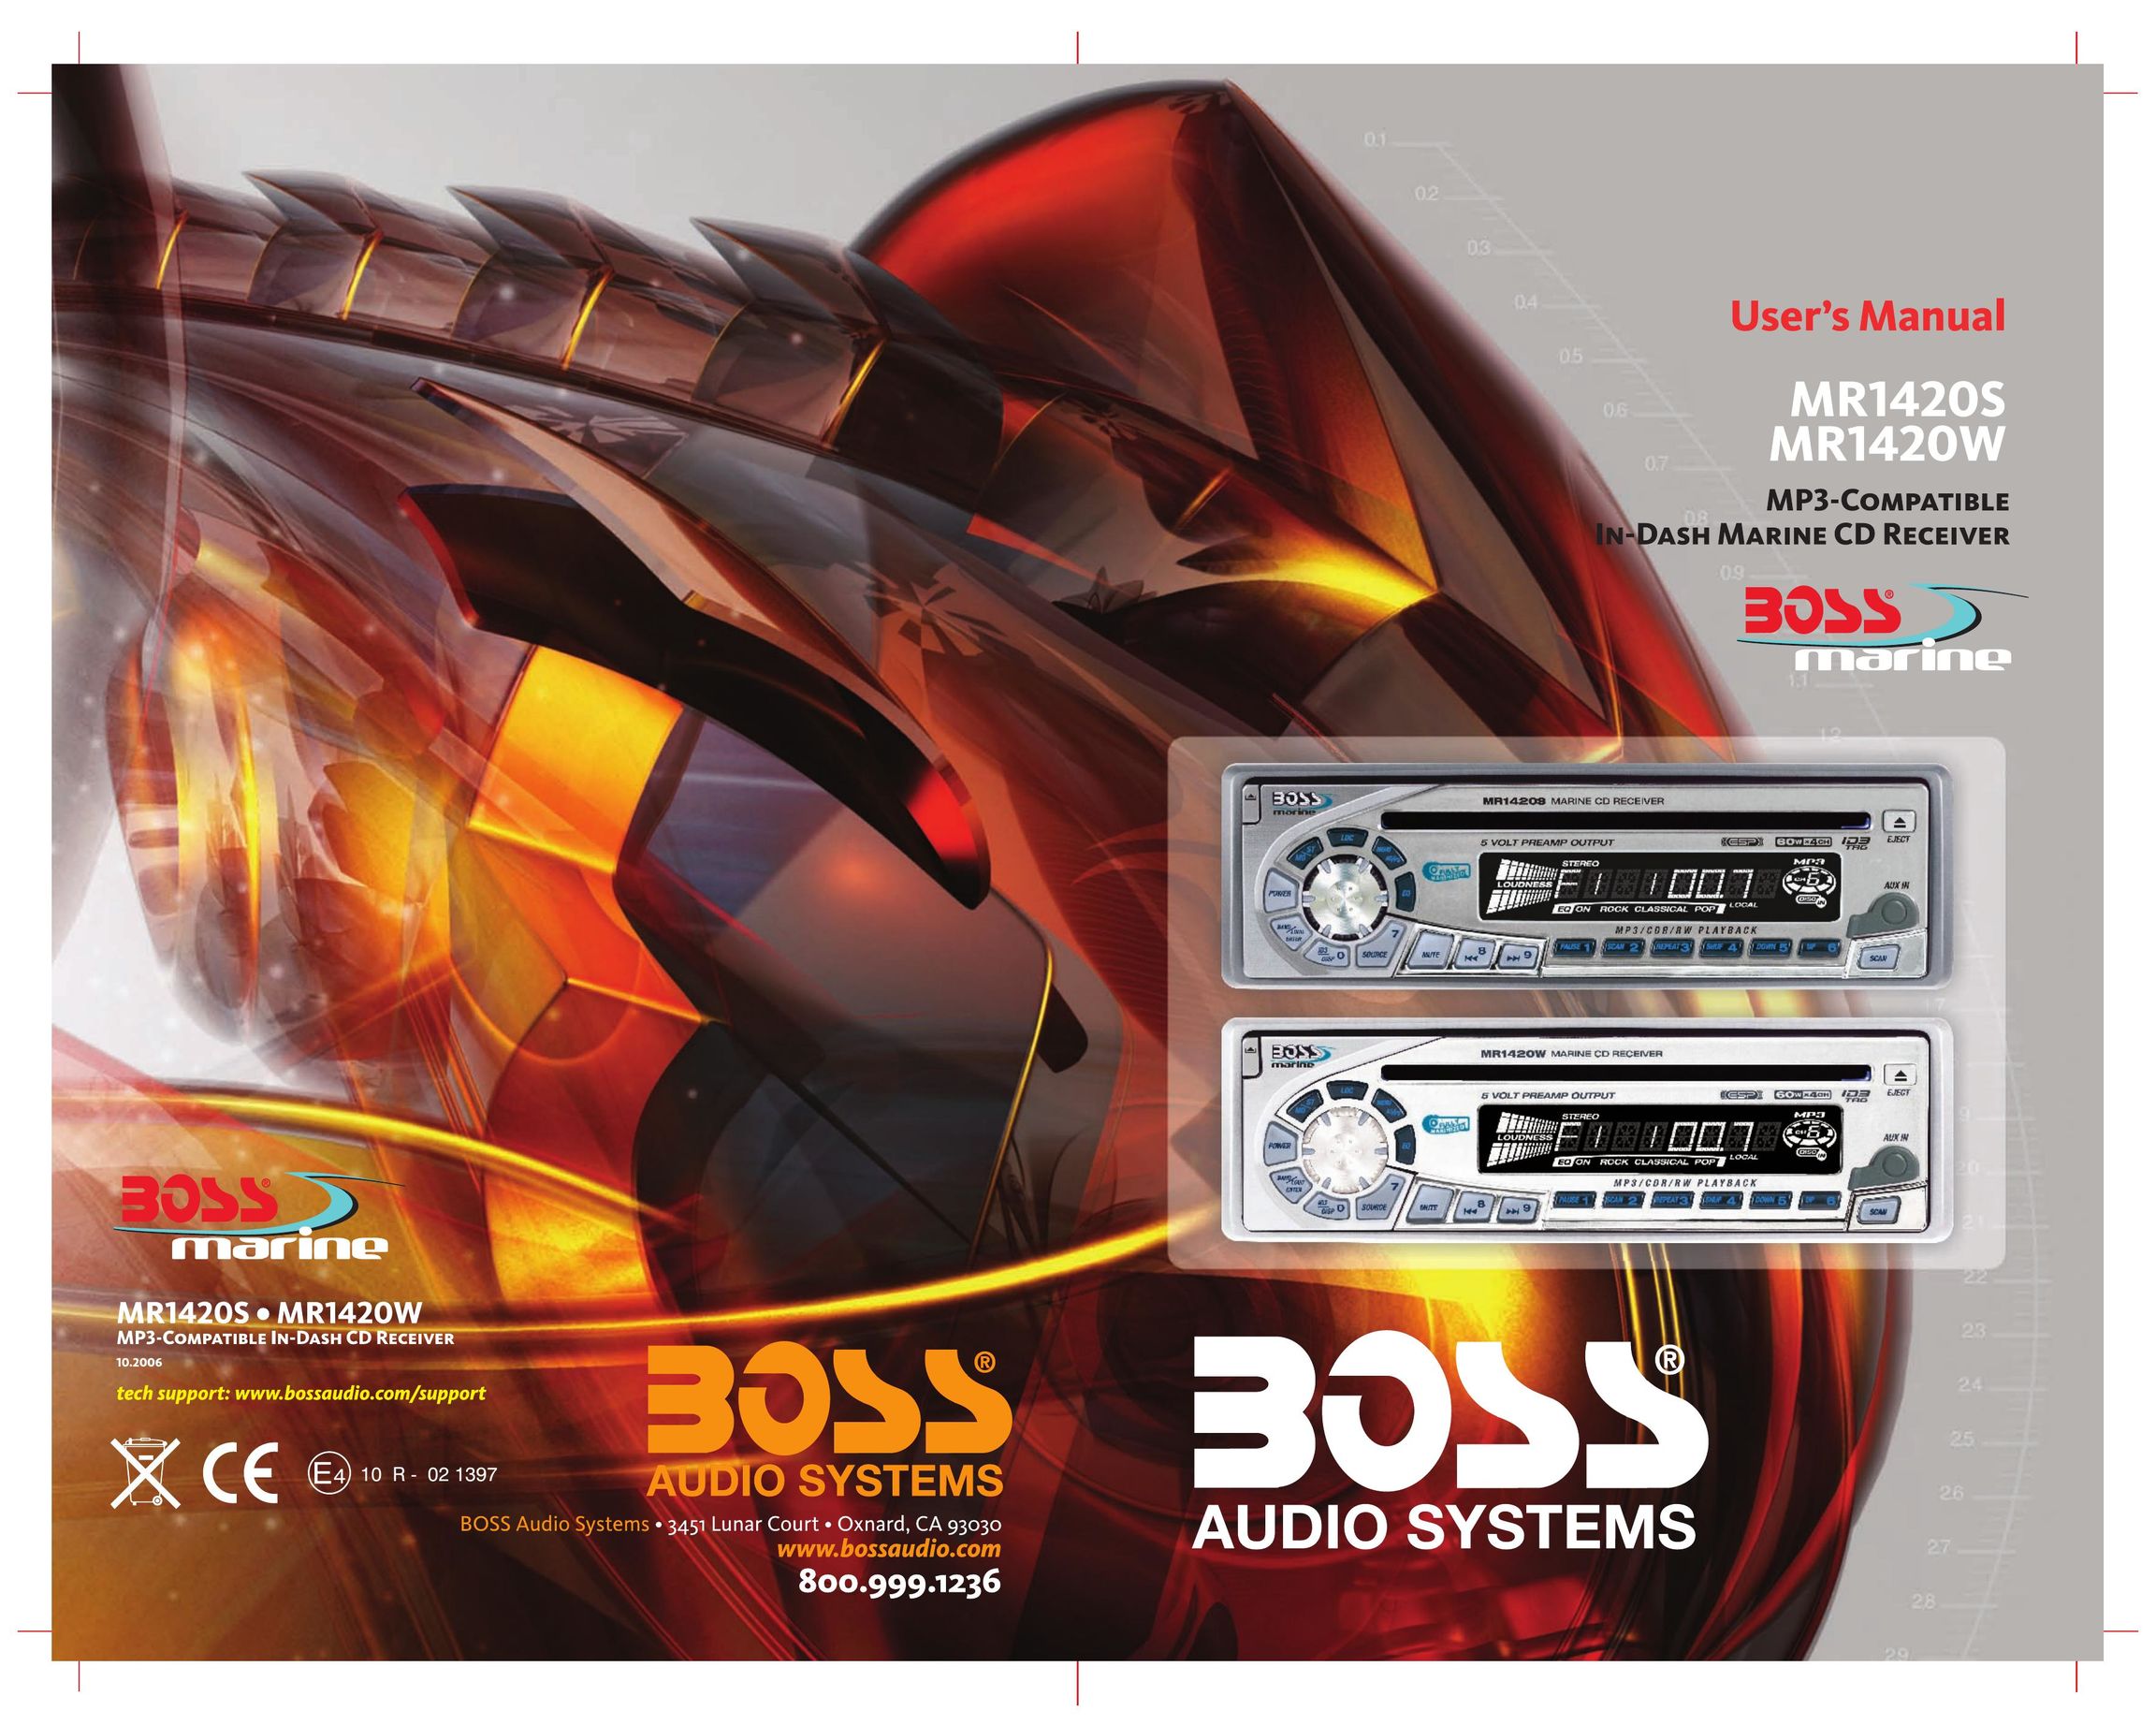 Boss Audio Systems MR1420S Carrying Case User Manual